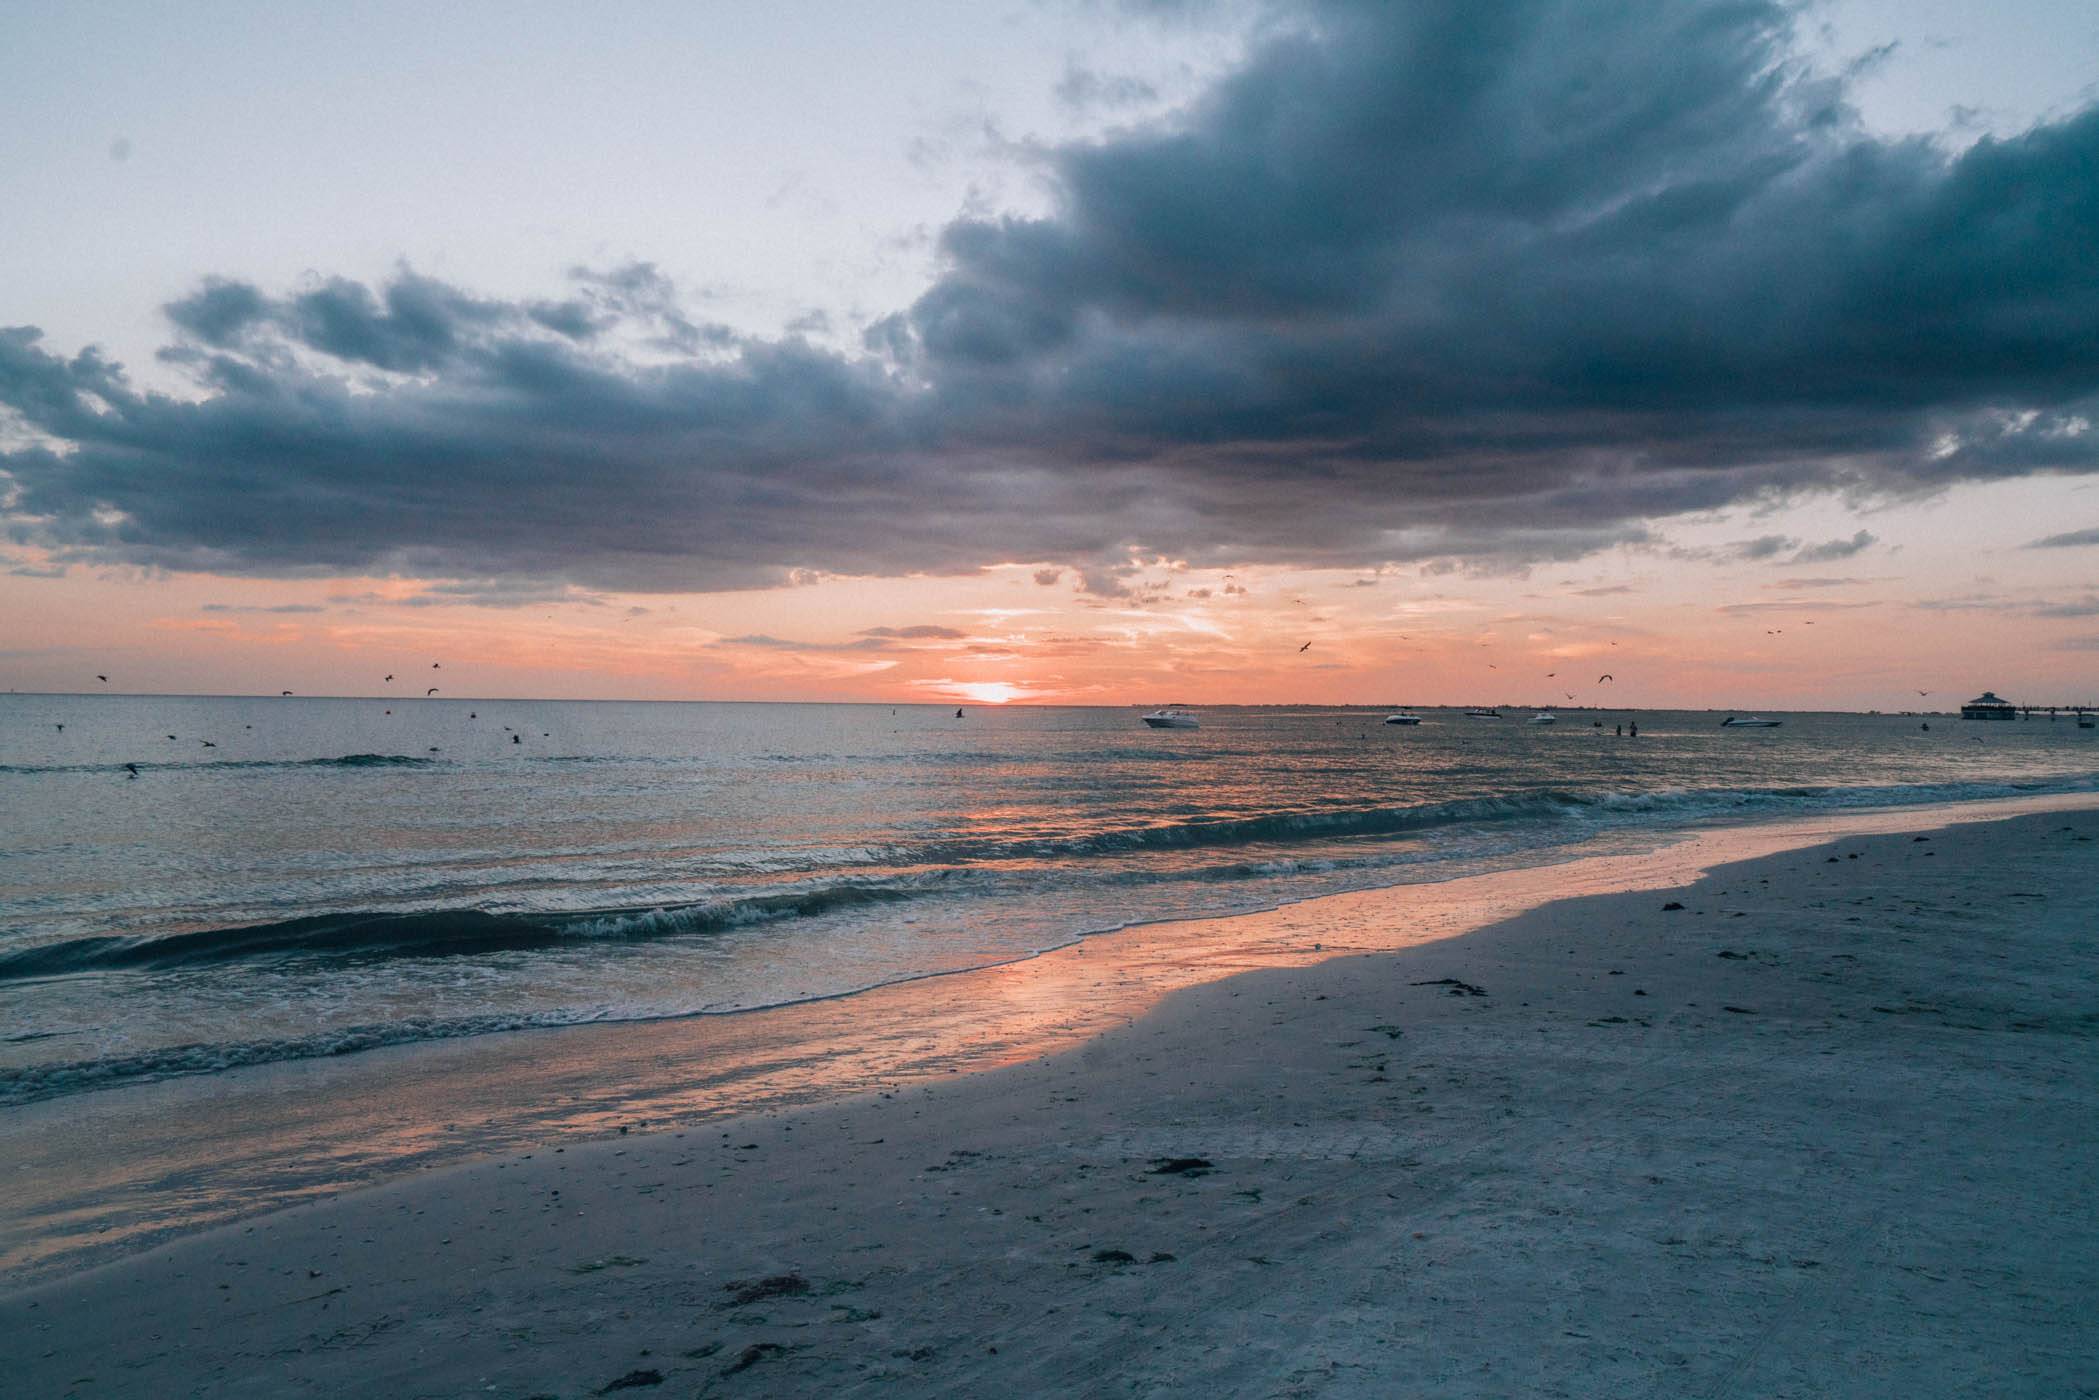 The Ultimate Guide to Naples, Florida (Things to do, eat, and see)